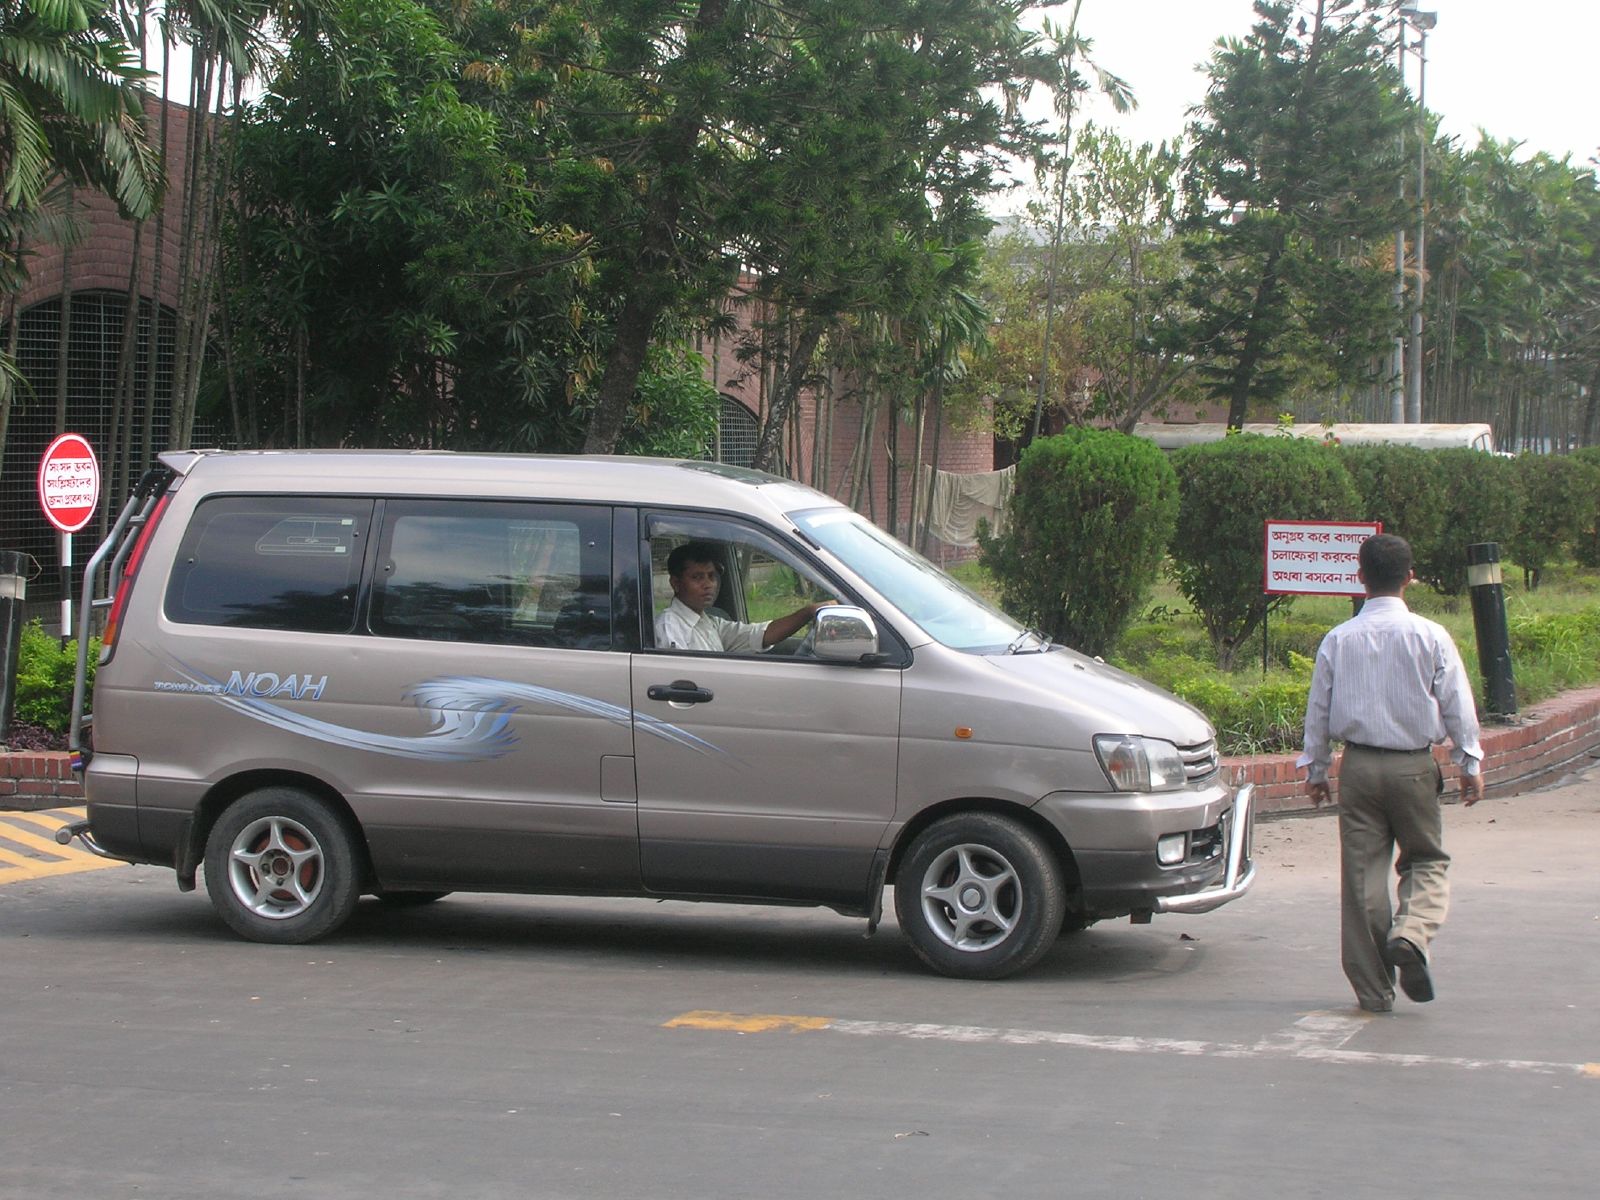 a van and man in street area near bushes